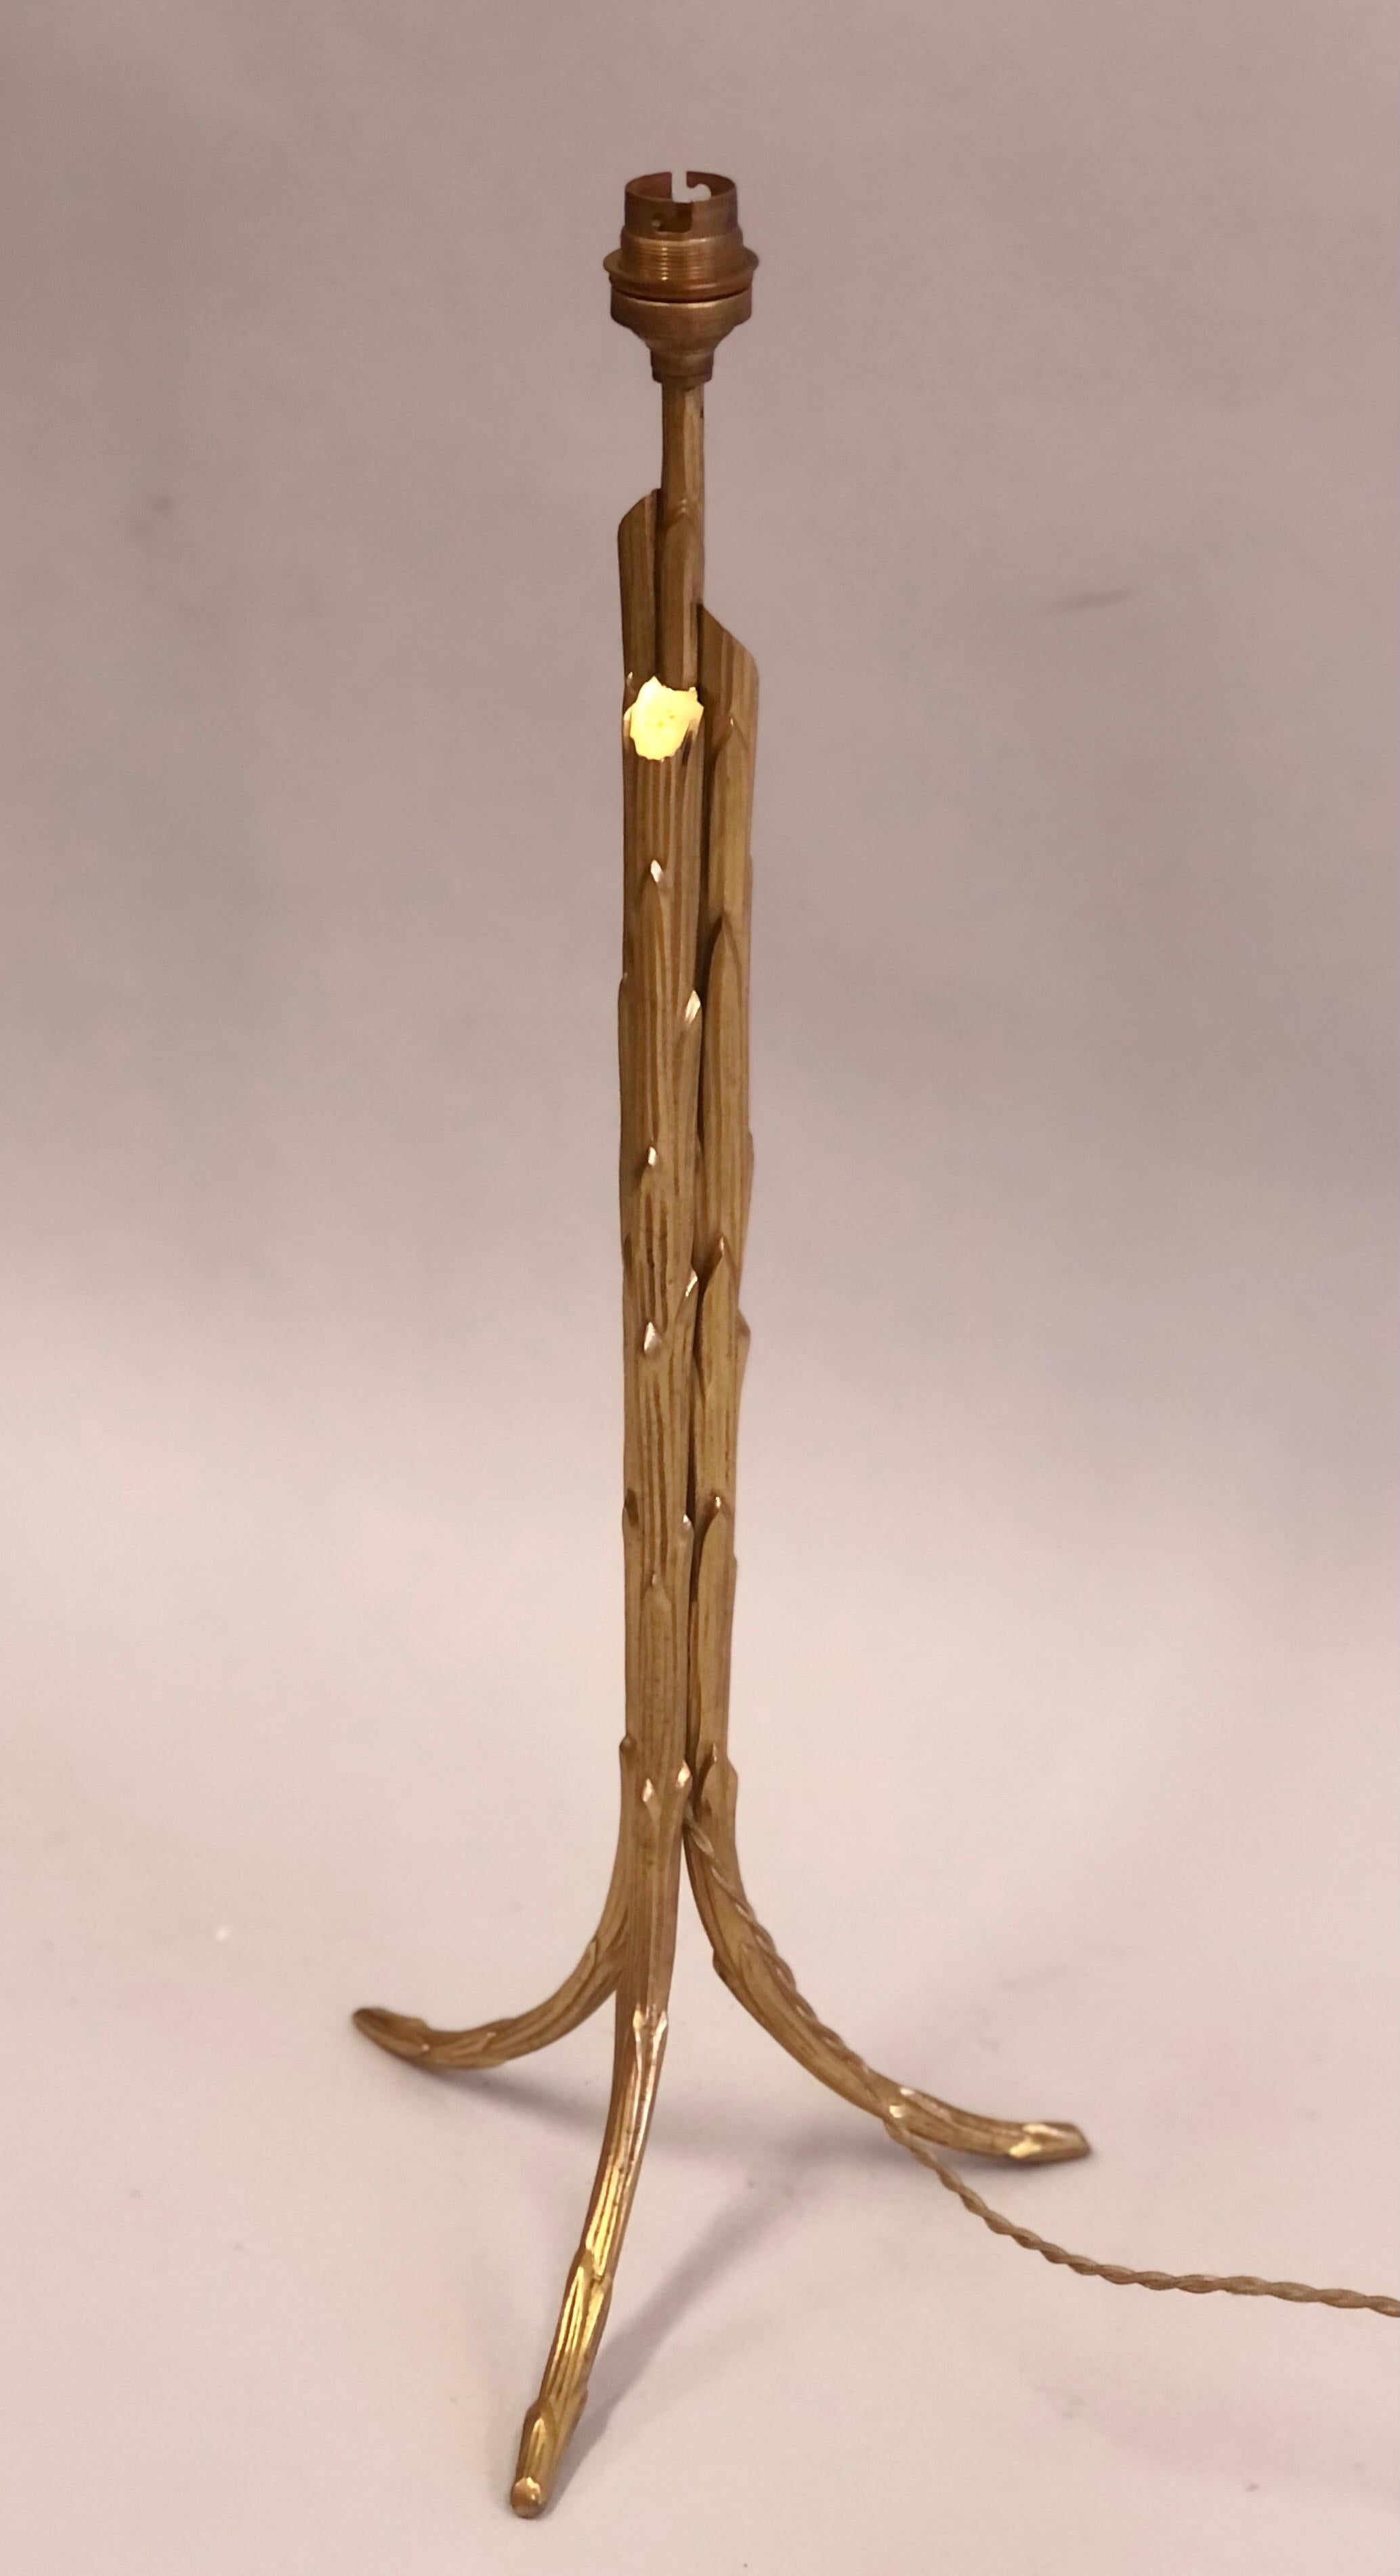 French Mod. Neoclassic Gilt Bronze Faux Bamboo Table Lamps, Maison Baguès, Pair For Sale 3